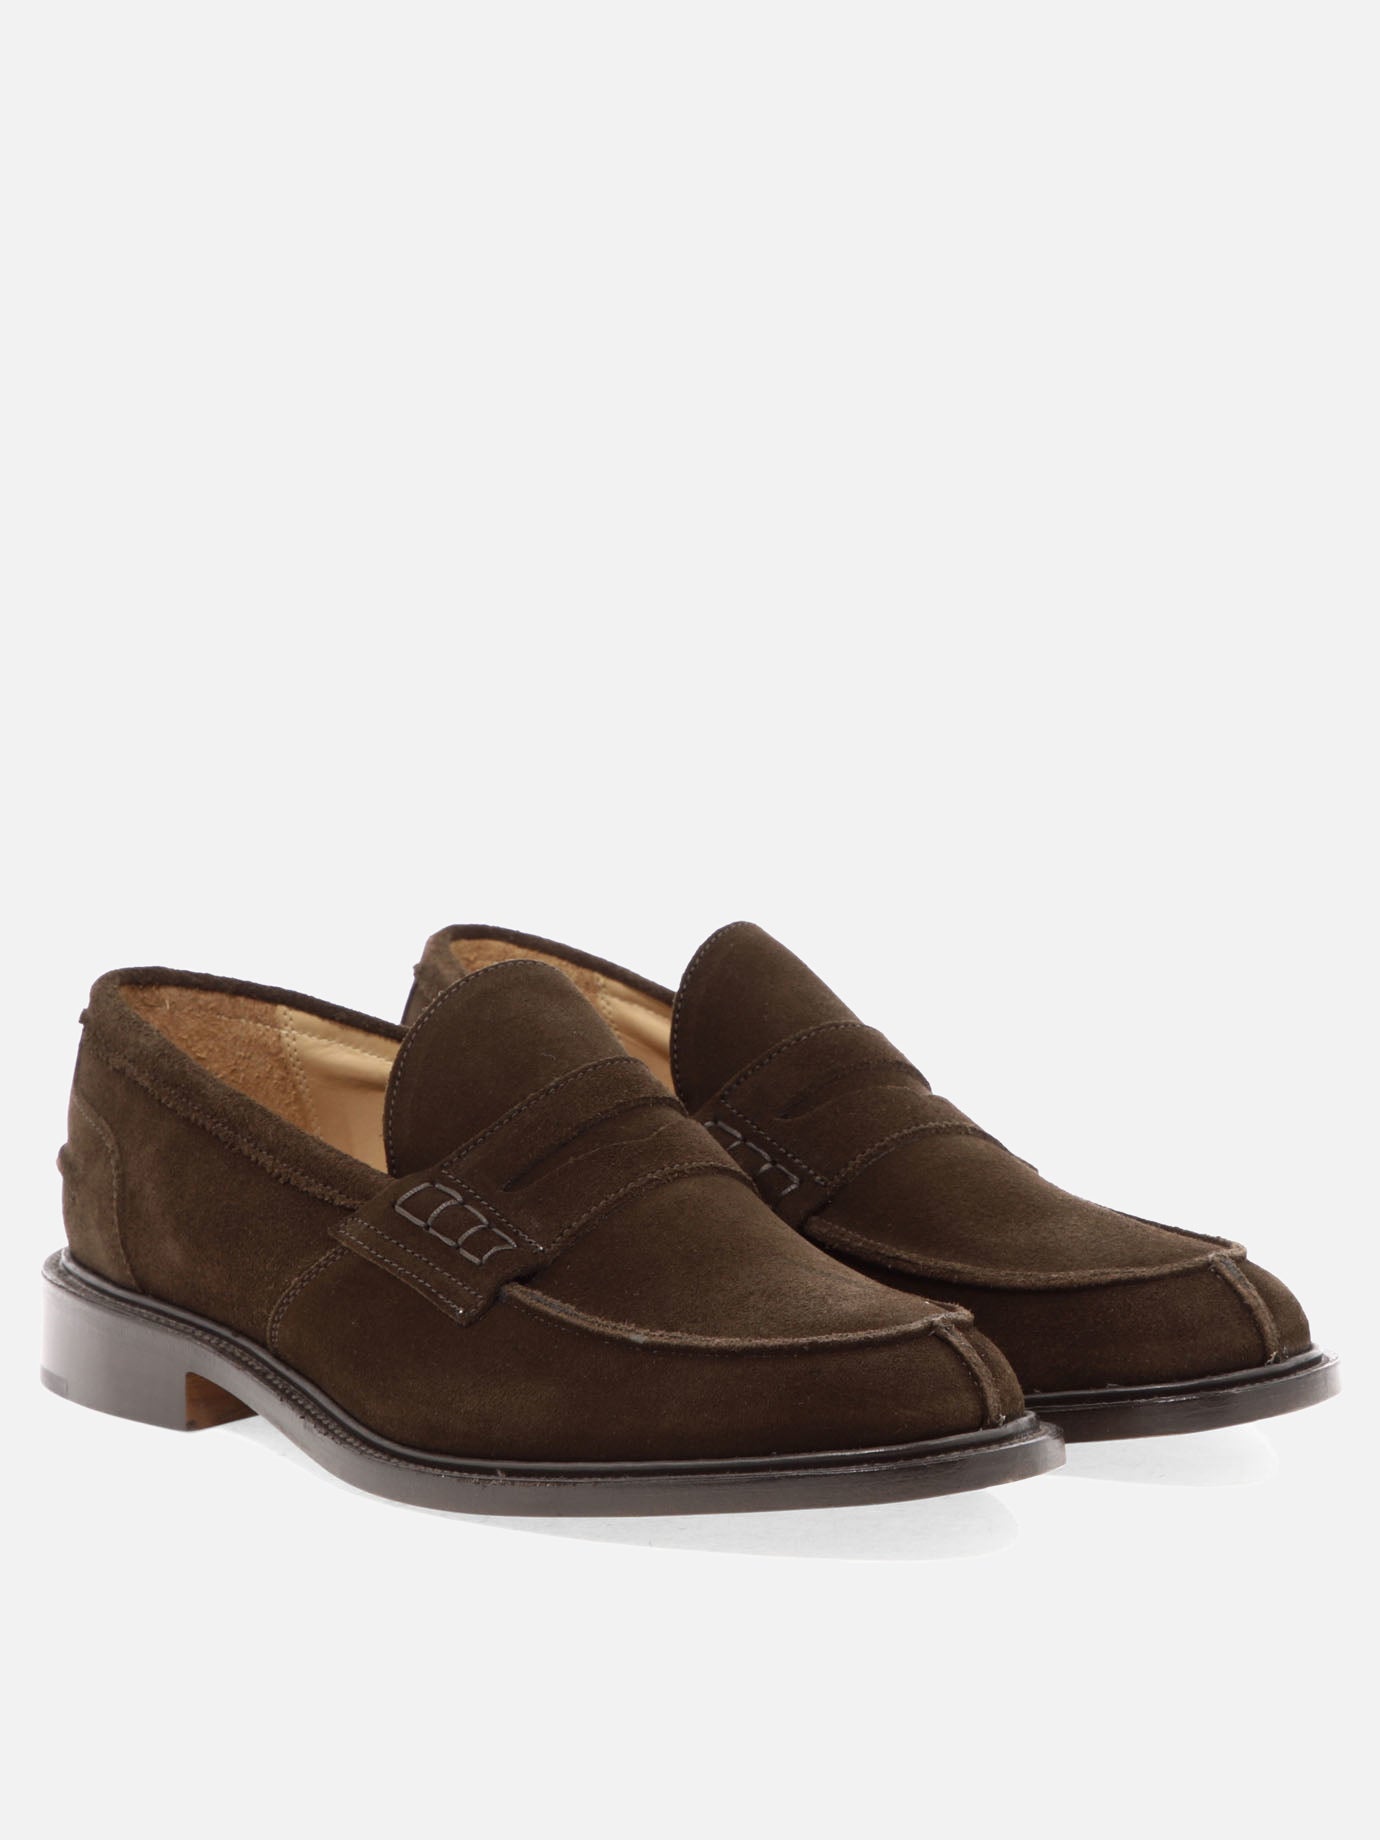 "James" loafers